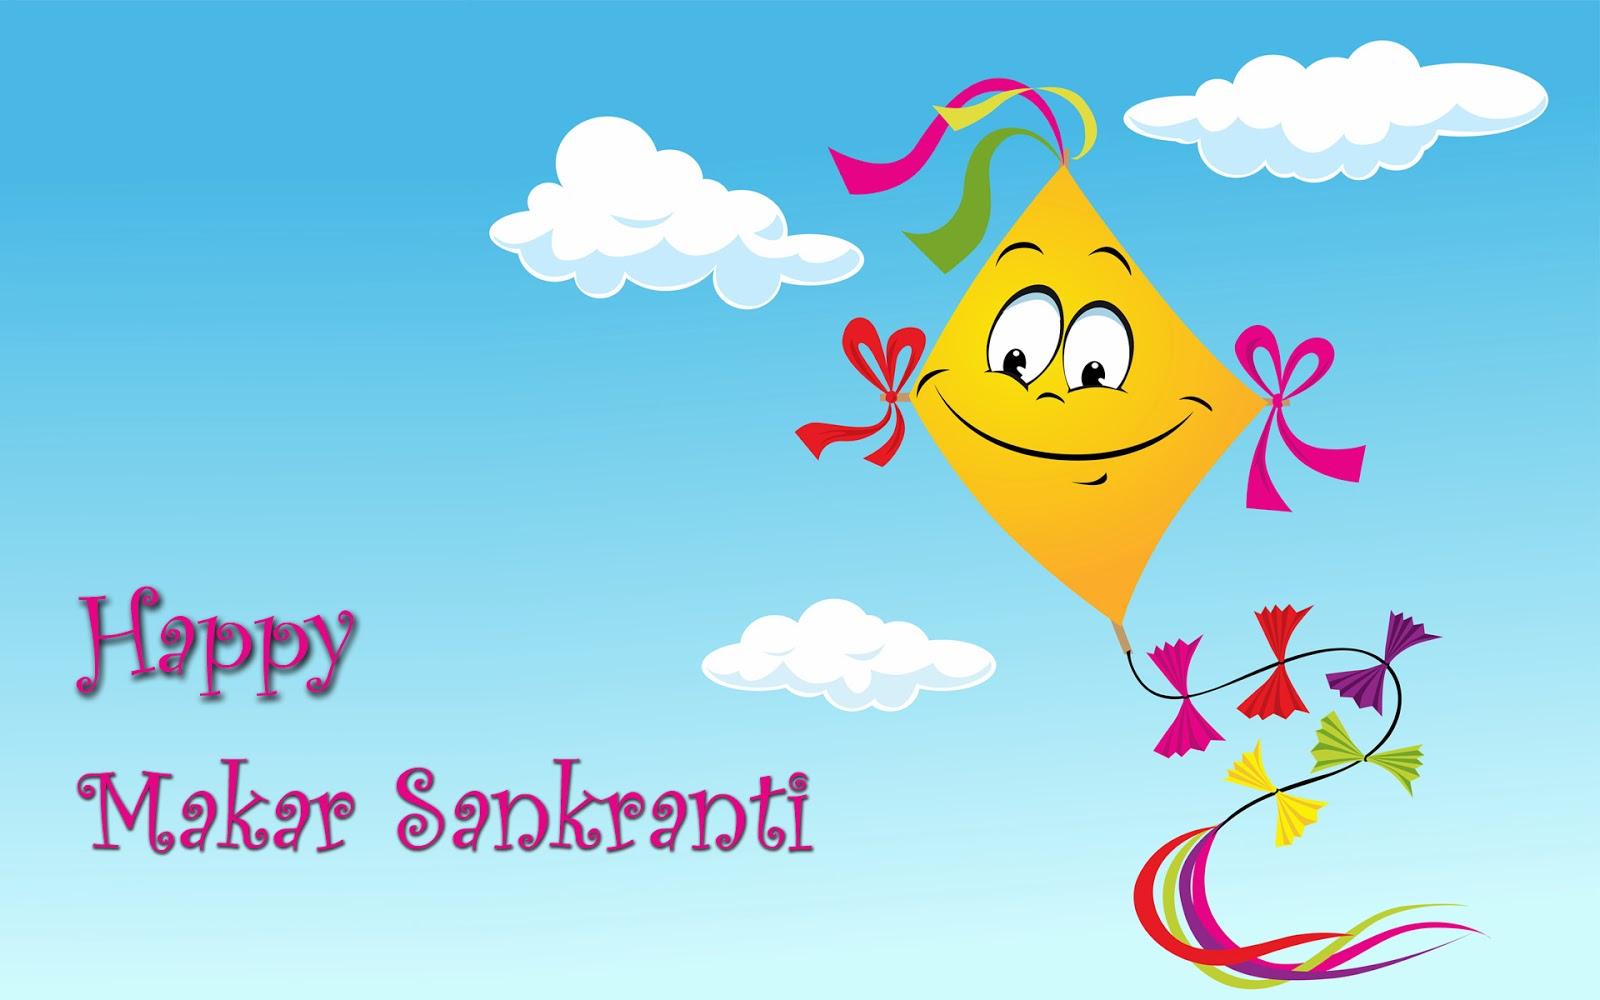 Makar Sankranti Images, Wallpapers, Pictures, Pics 2023 Download in HD